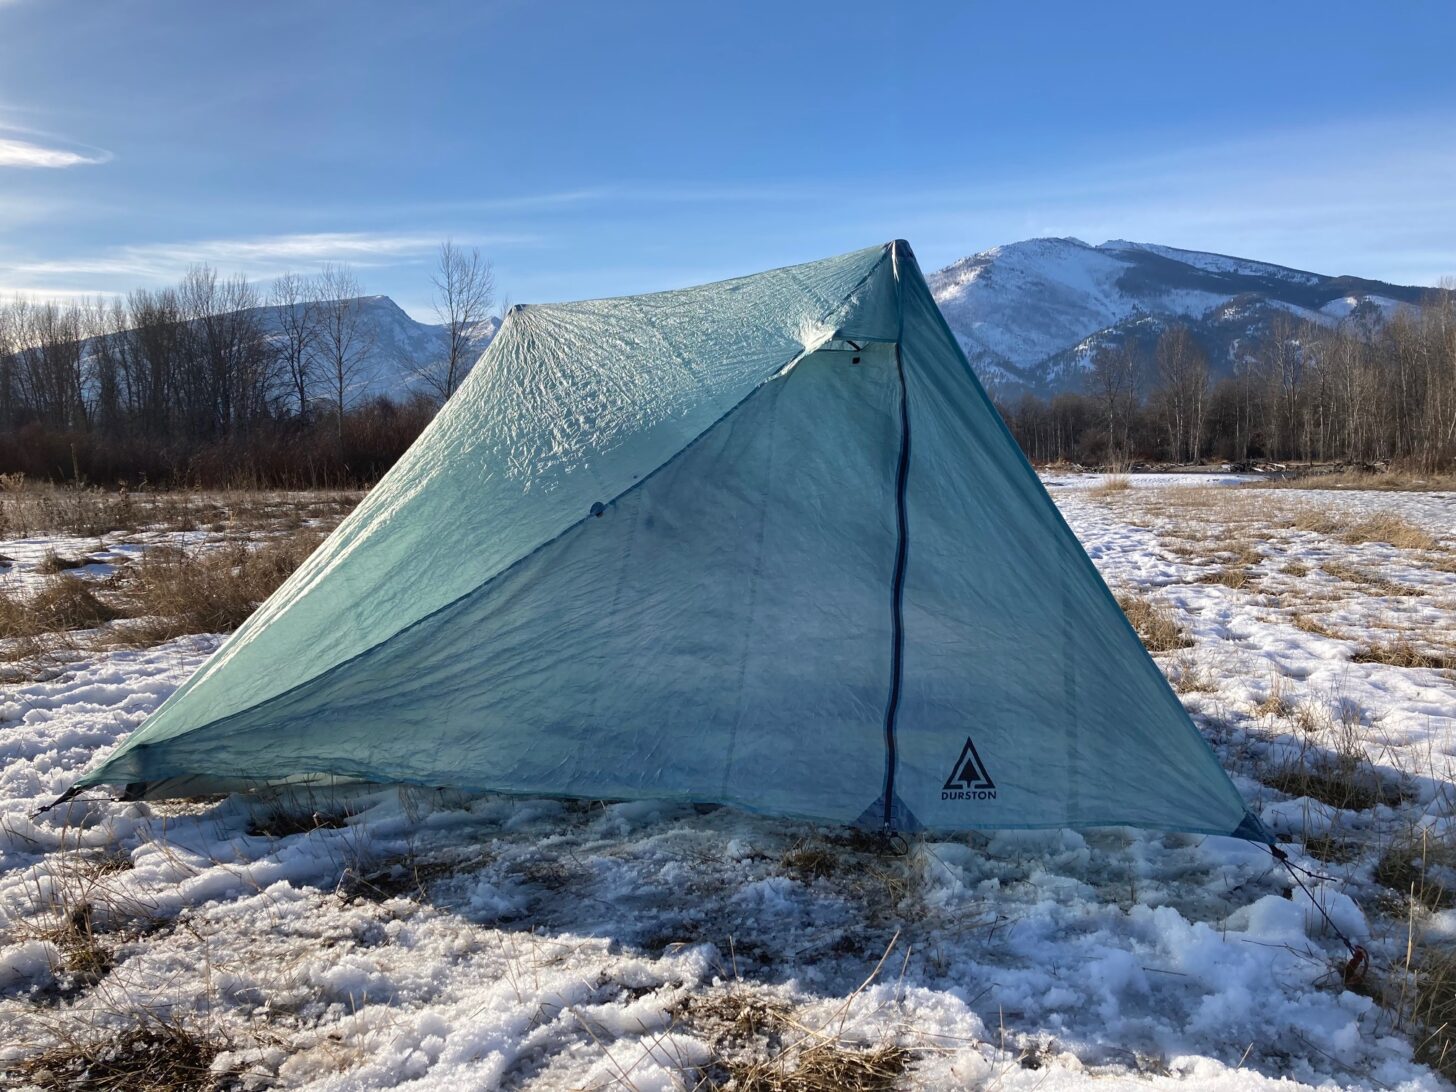 A tent and background are pitched on top of snow with mountains in the background.